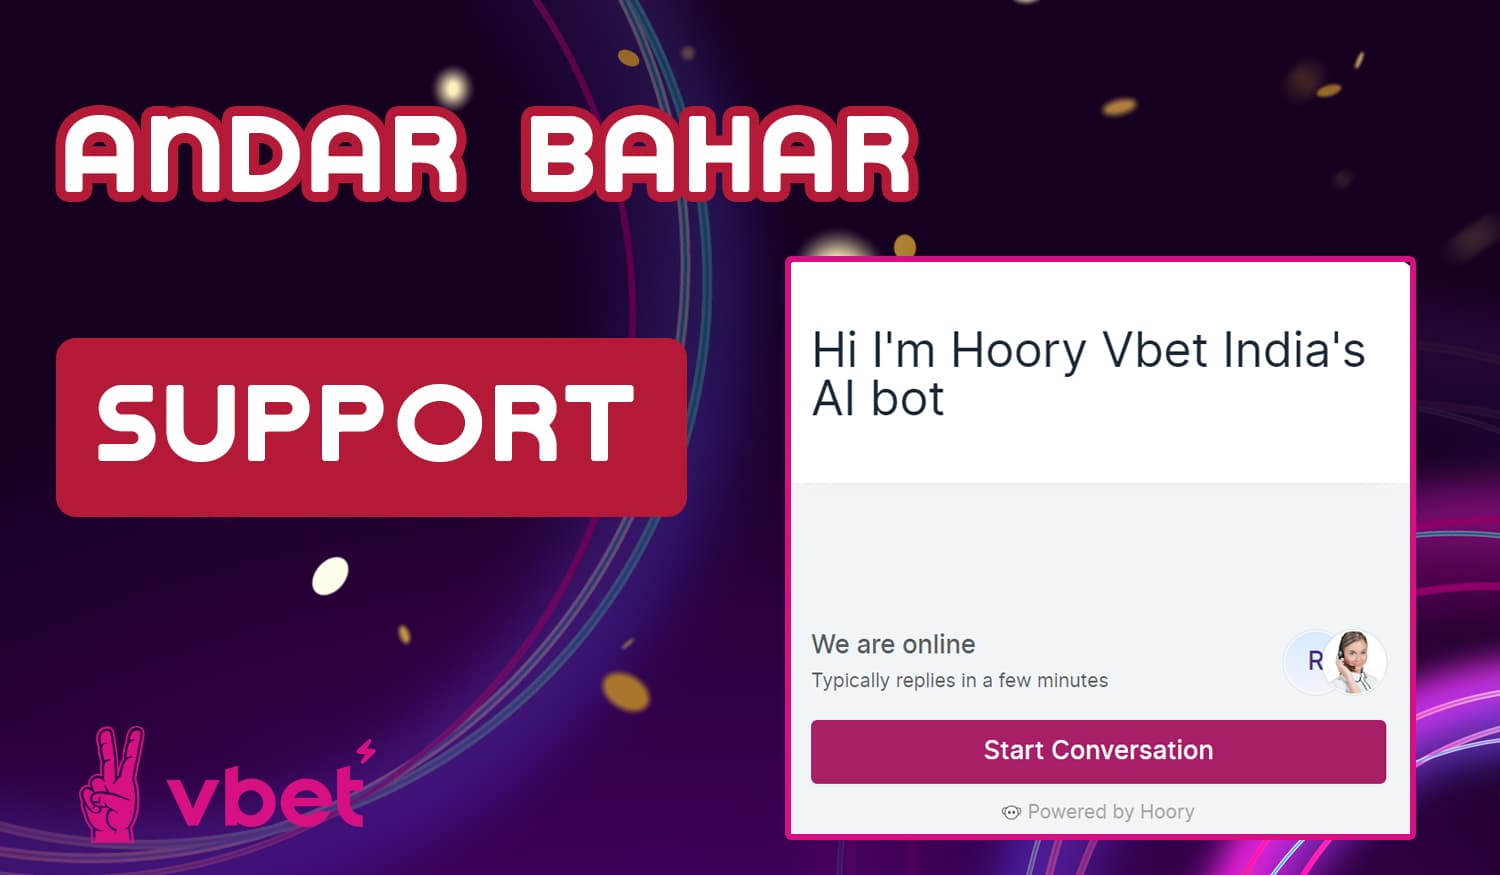 Vbet10 support contacts for questions about Andar Bahar and payouts